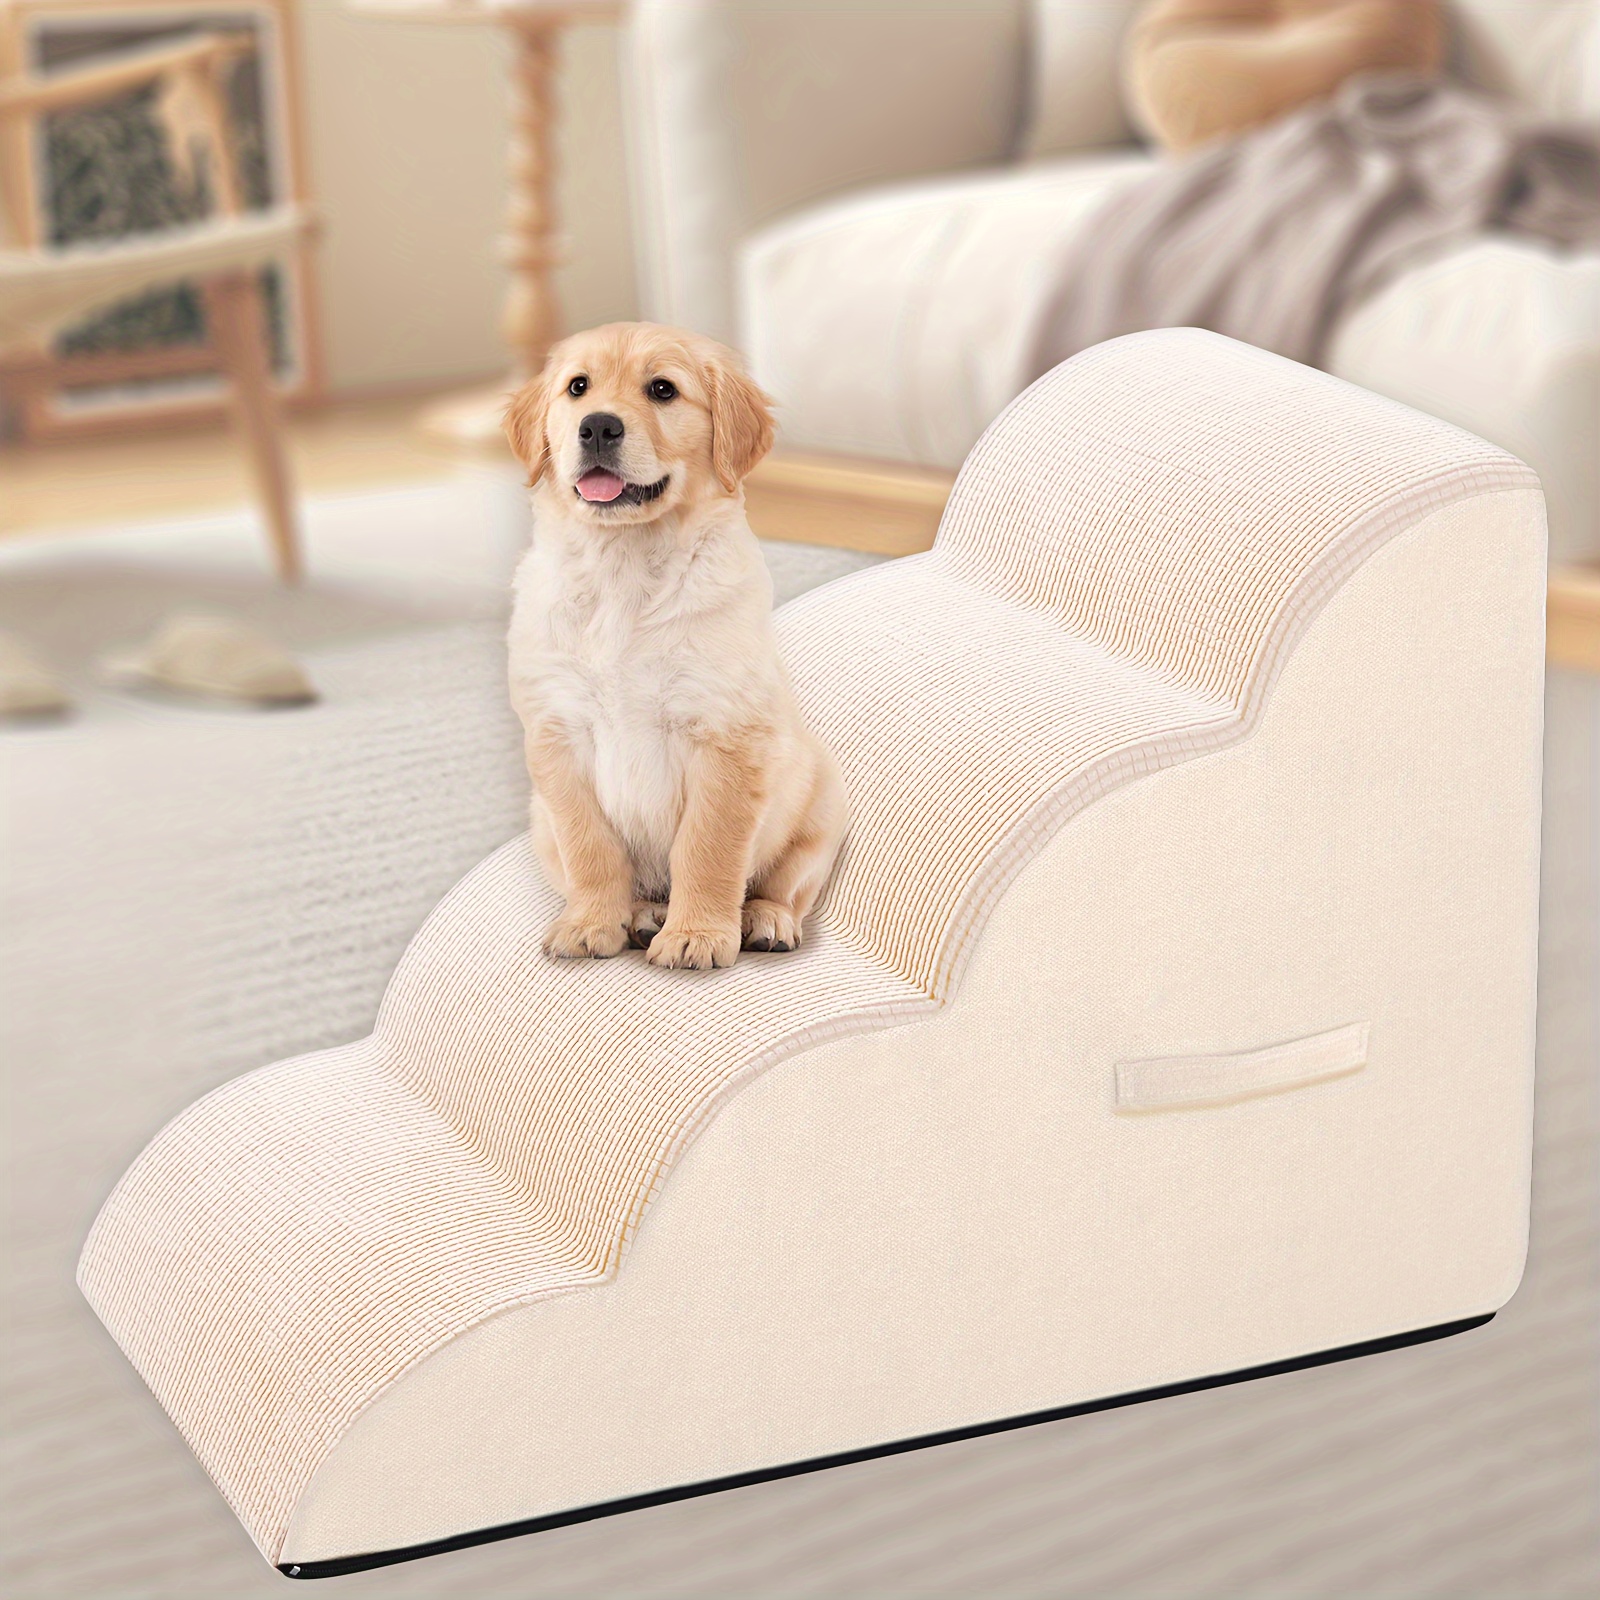 

Dog Steps For Small Dog, 2/3/4 Steps Dog Stairs Ramps For Bed, Non-slip Pet Steps, Removable And Washable Sofa Bed Ladder For Dogs Injured, Older Dogs Cats, Pet With Joint Pain